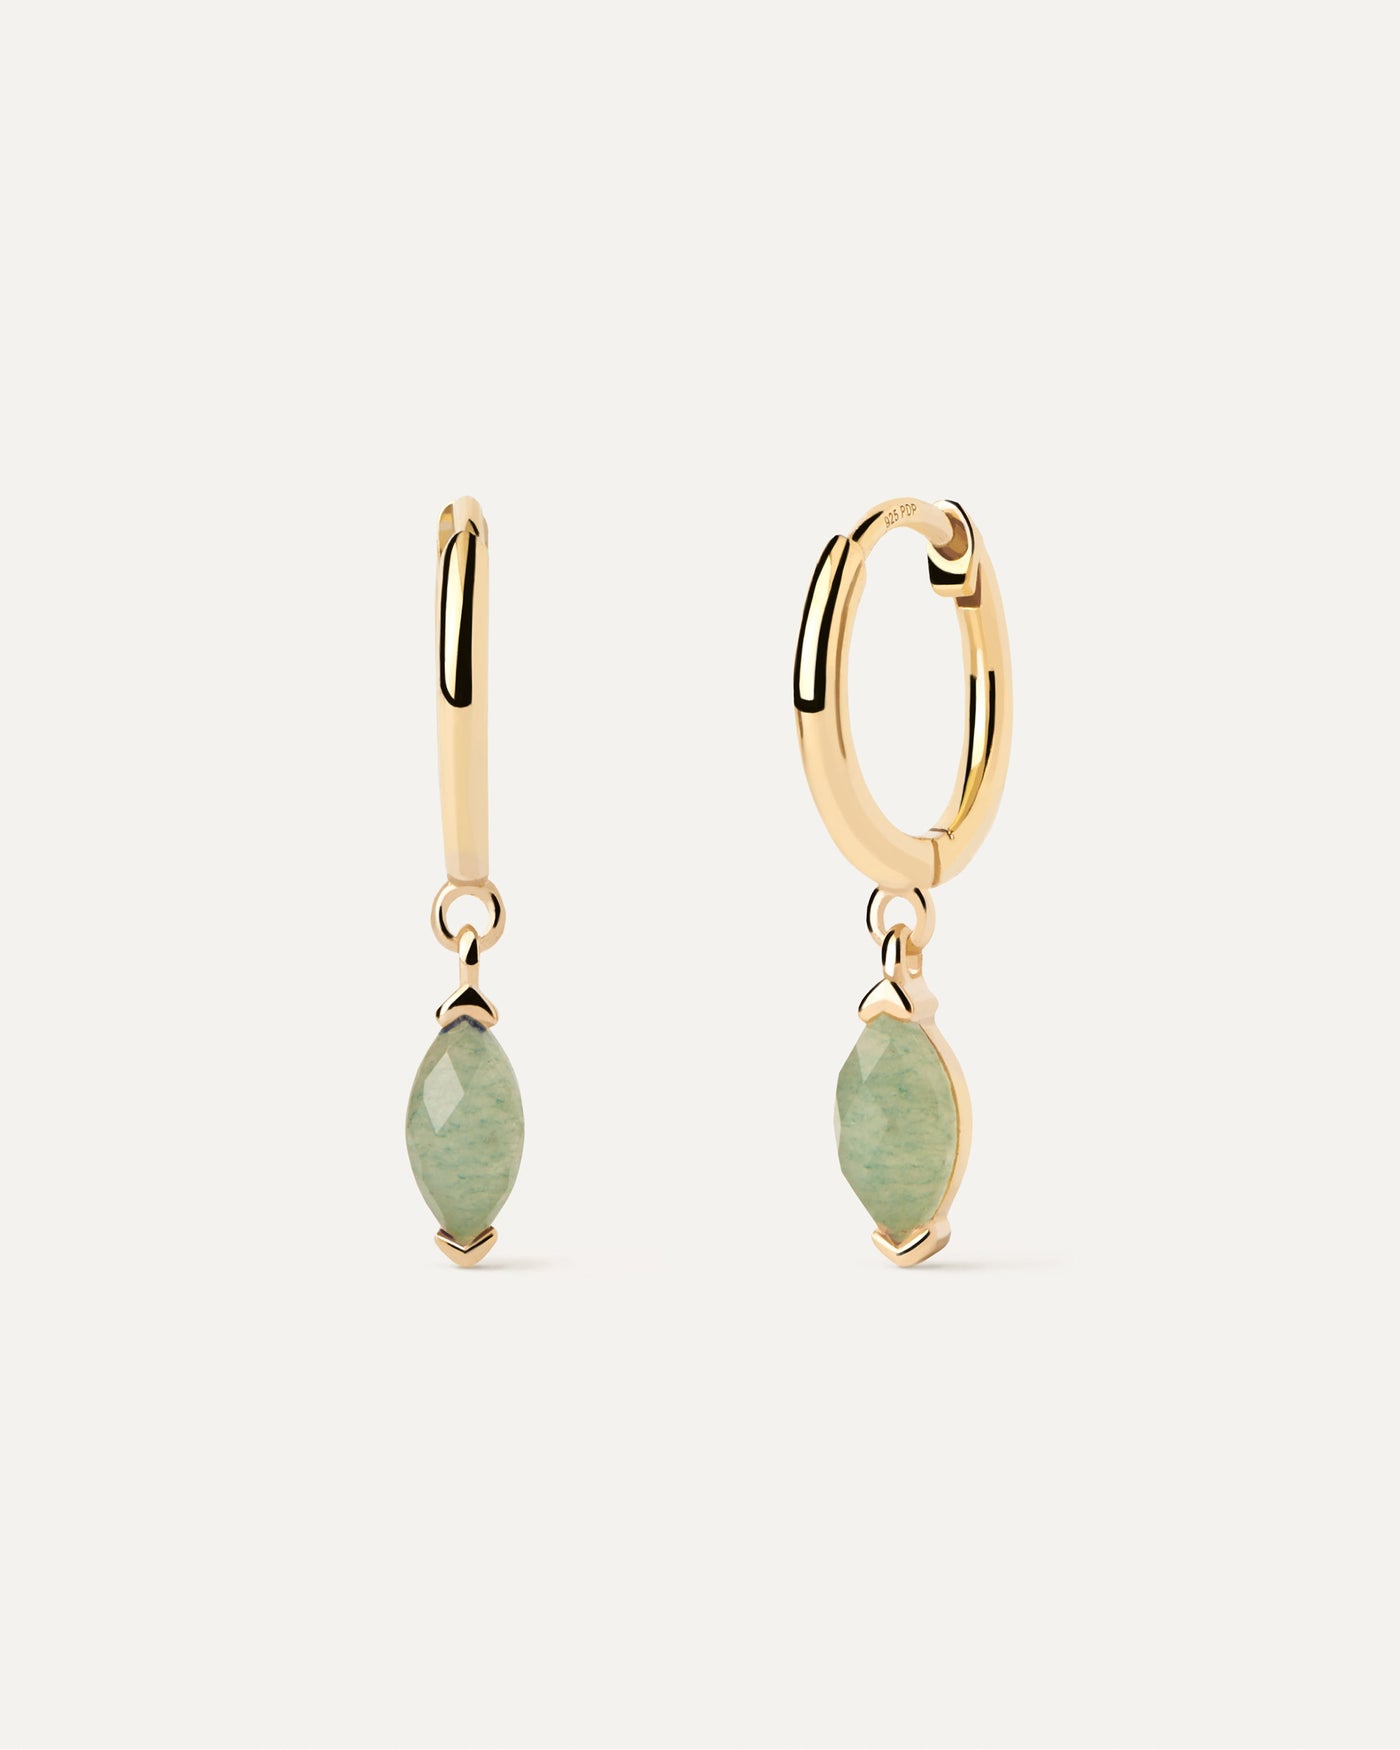 2023 Selection | Green Aventurine Nomad Hoops. Gold-plated drop hoops with pear shape green gemstone pendant. Get the latest arrival from PDPAOLA. Place your order safely and get this Best Seller. Free Shipping.